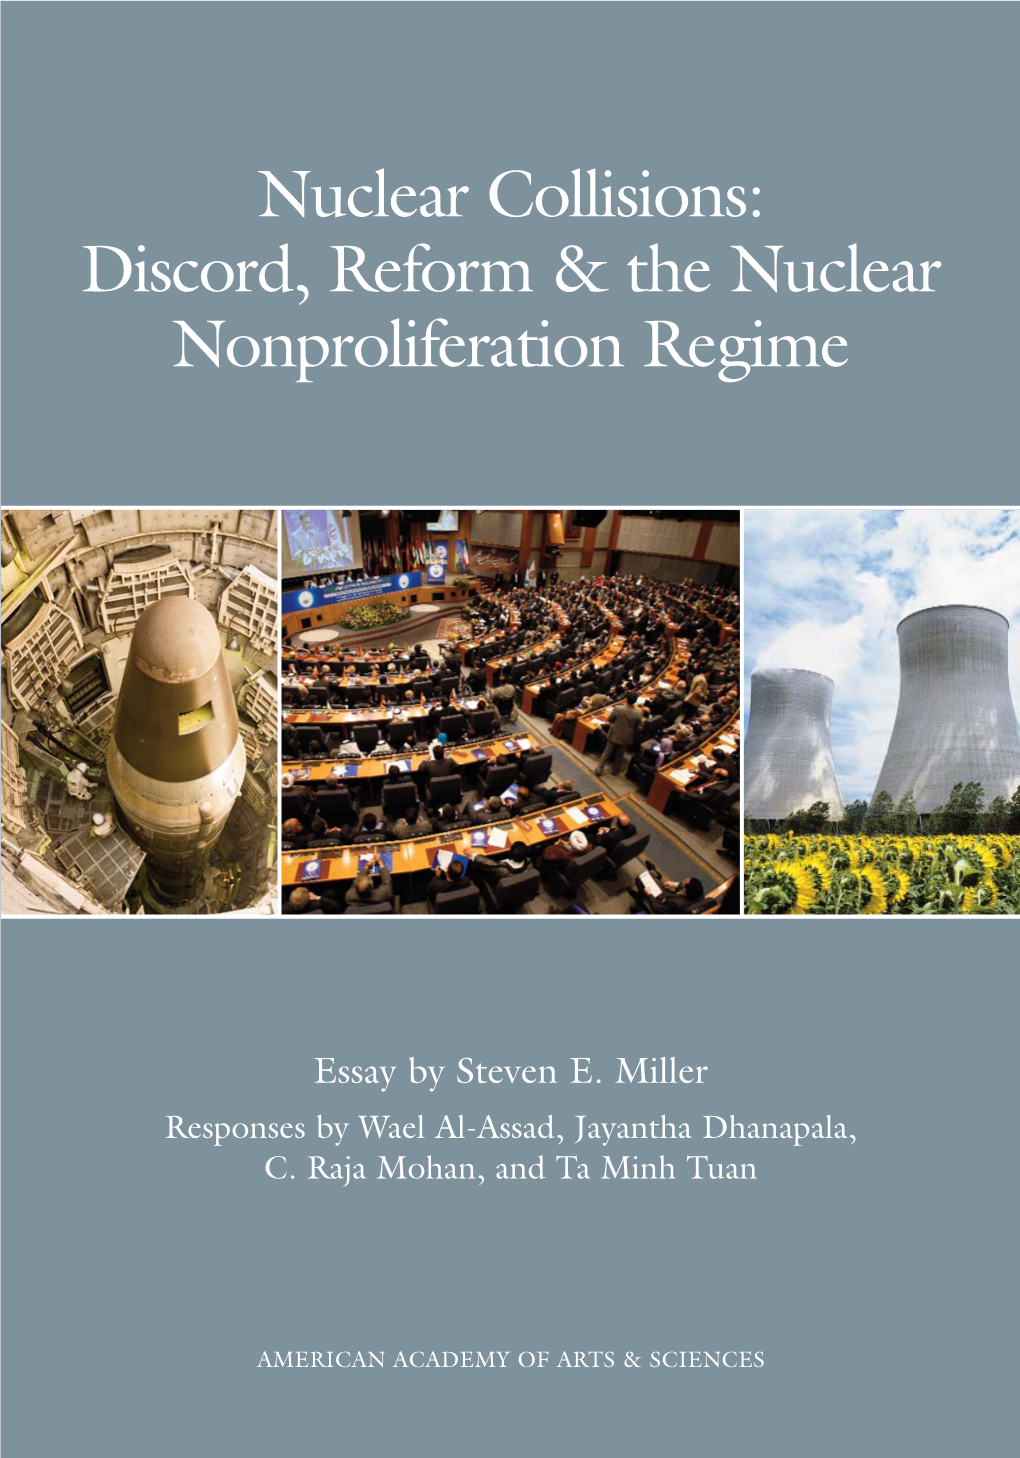 Nuclear Collisions: Discord, Reform & the Nuclear Nonproliferation Regime